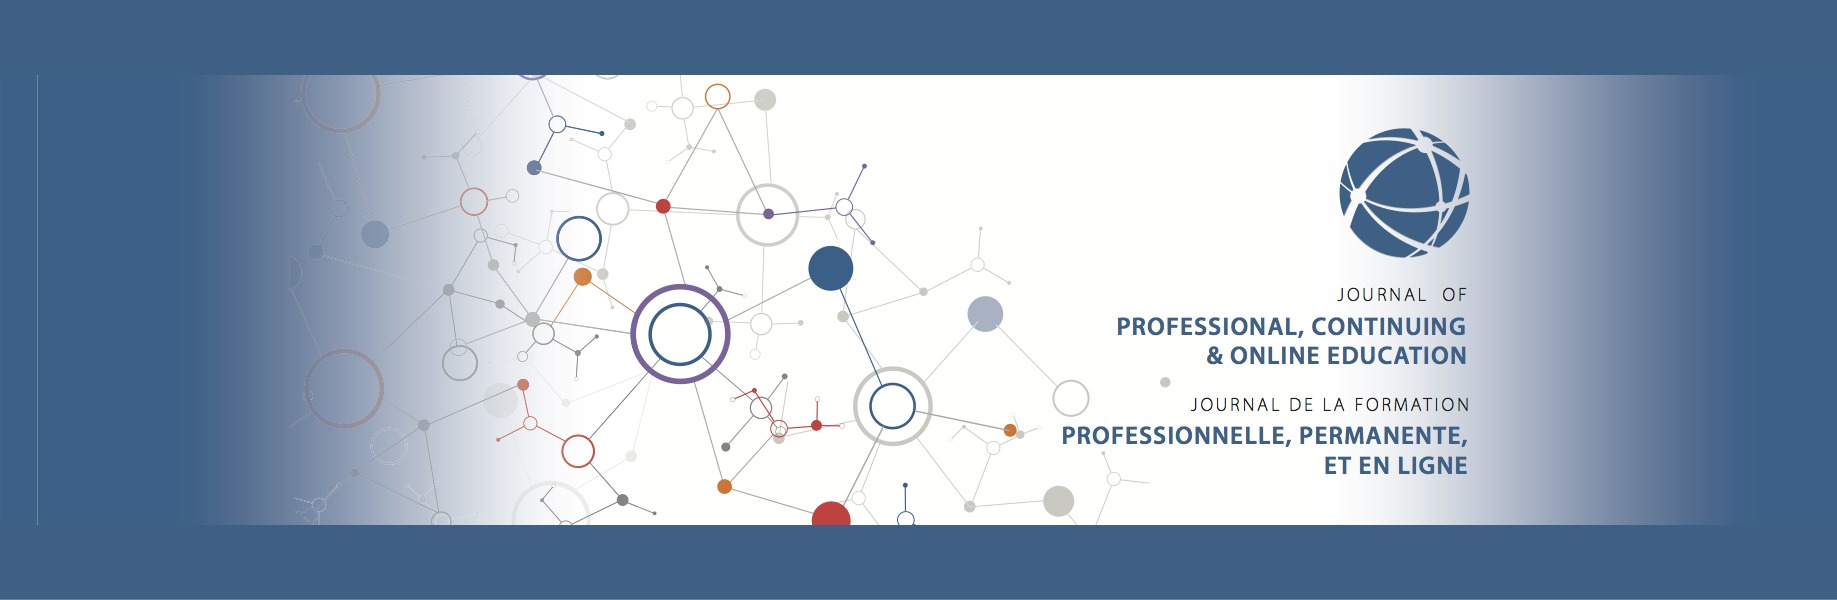 Journal of Professional, Continuing, and Online Education logo